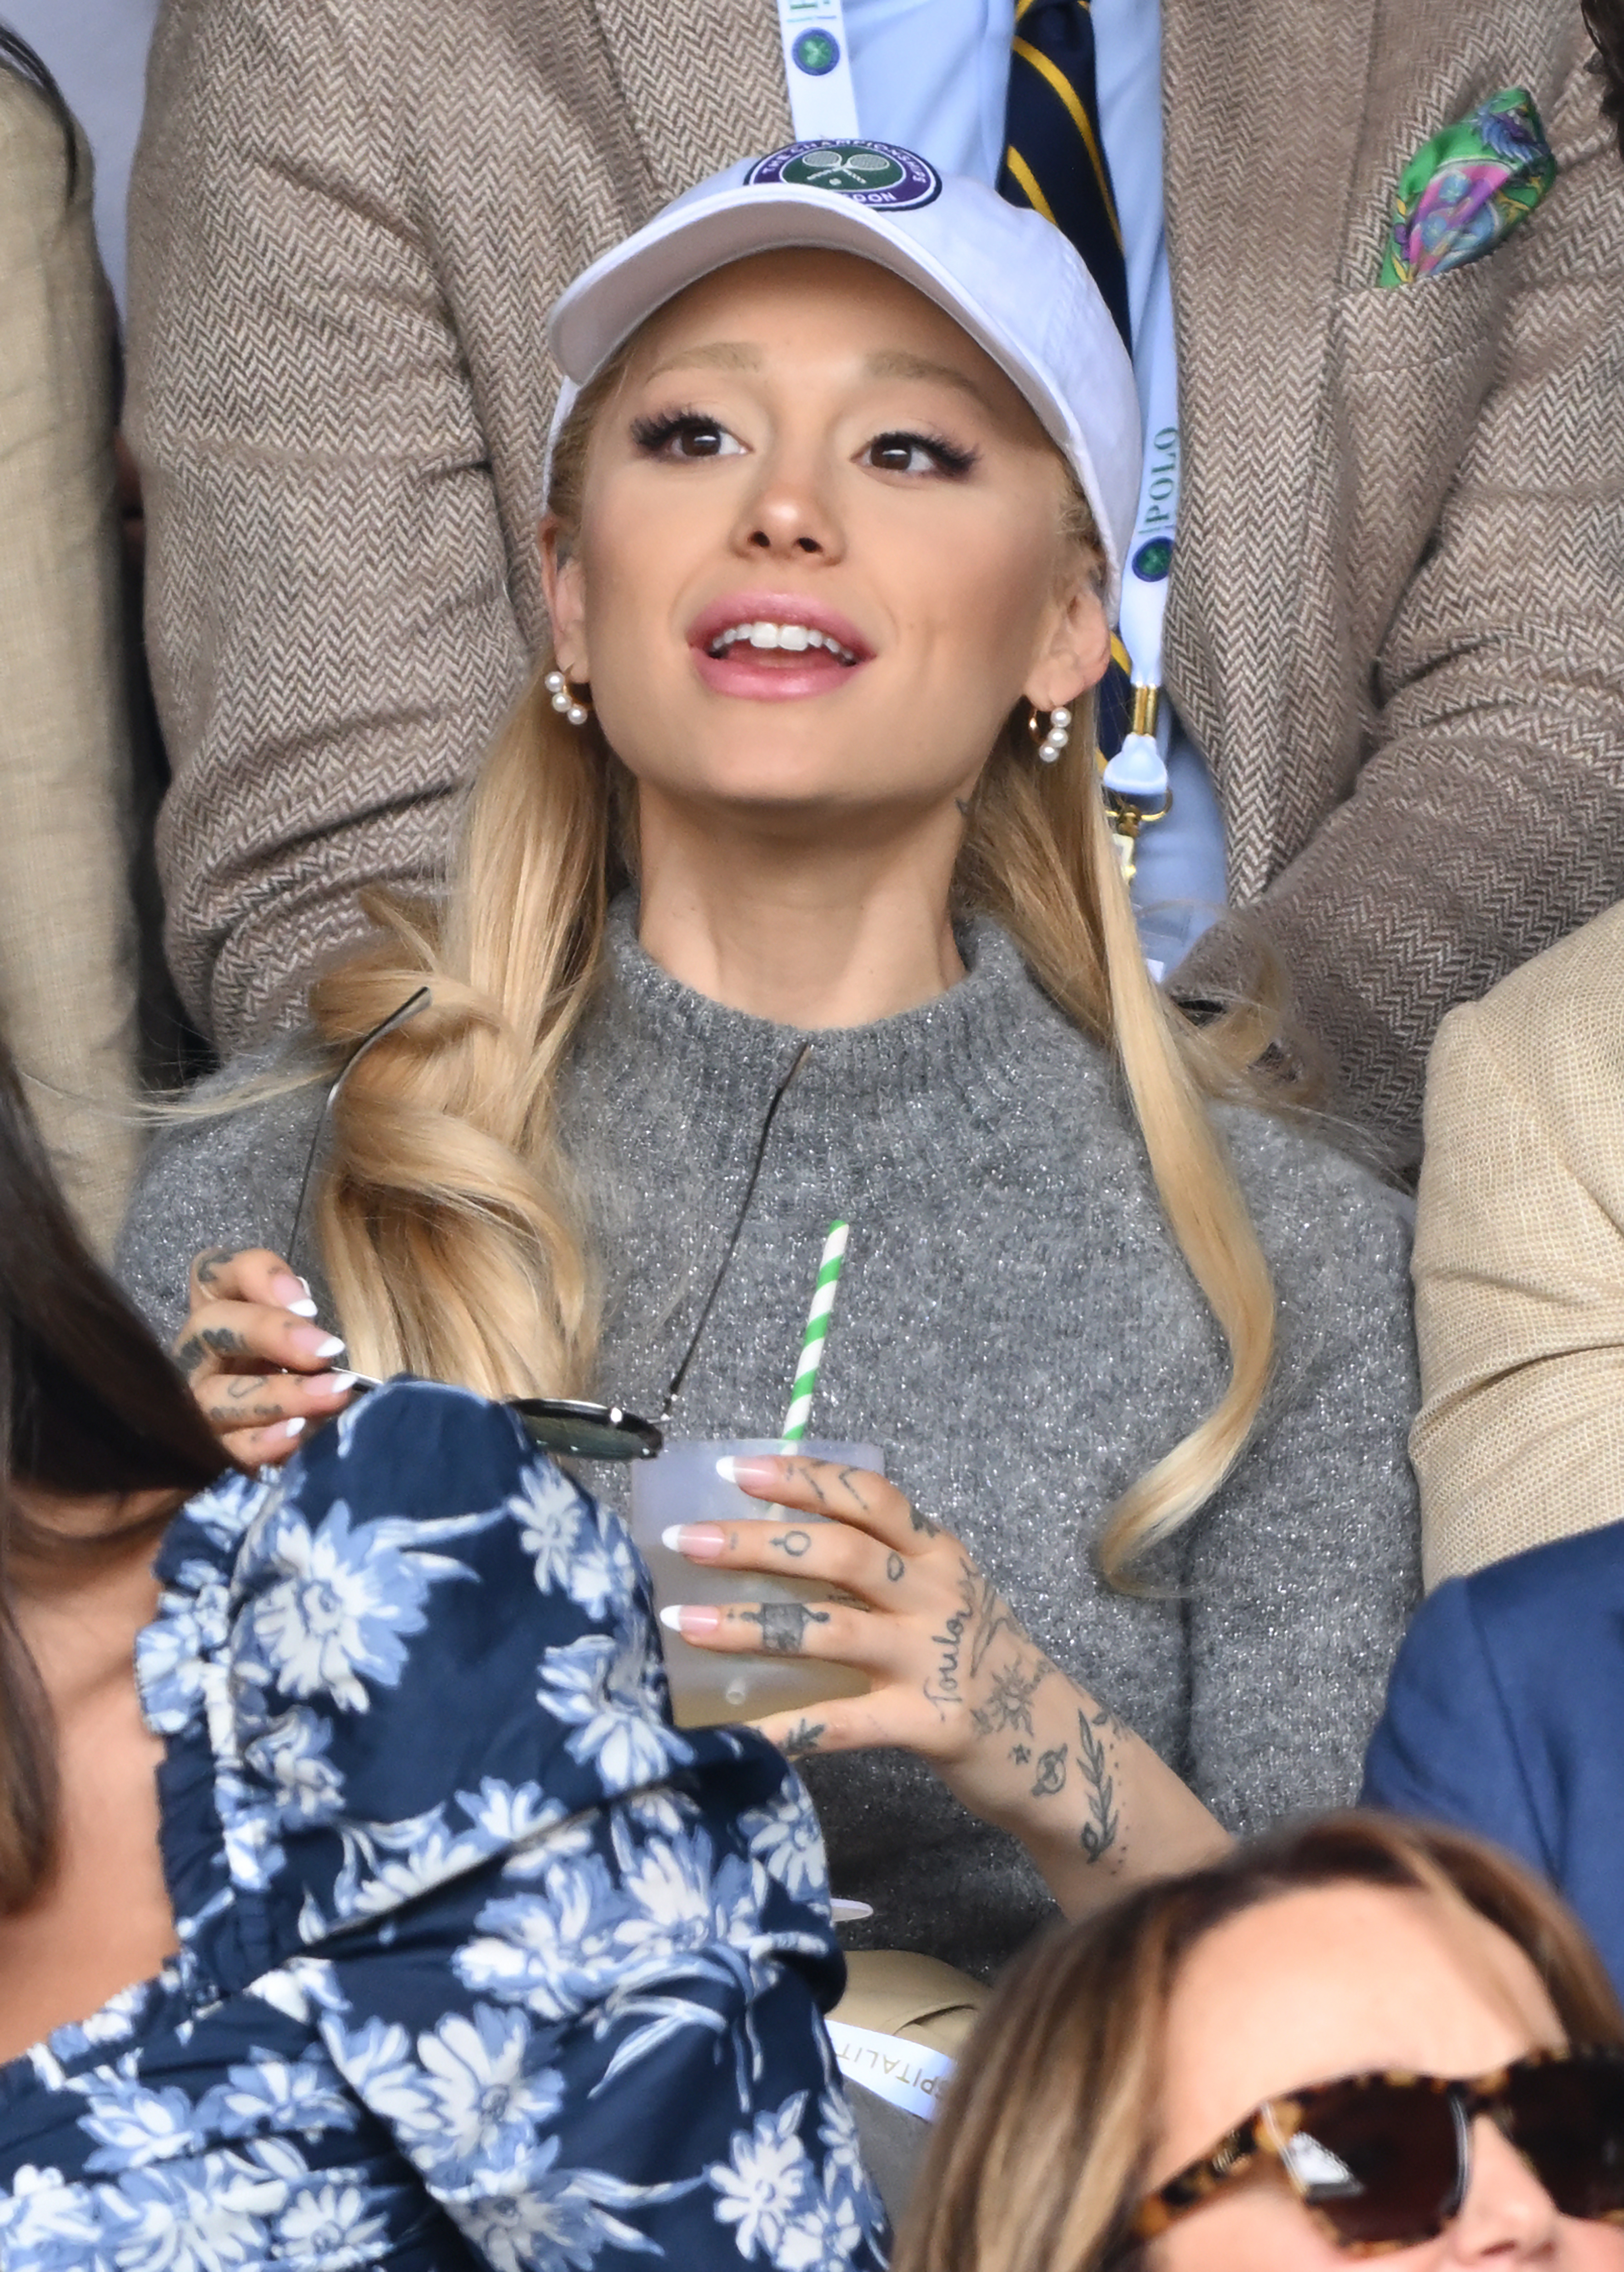 Ariana in a sweater and cap, holding a drink &amp;amp; watching a tennis match